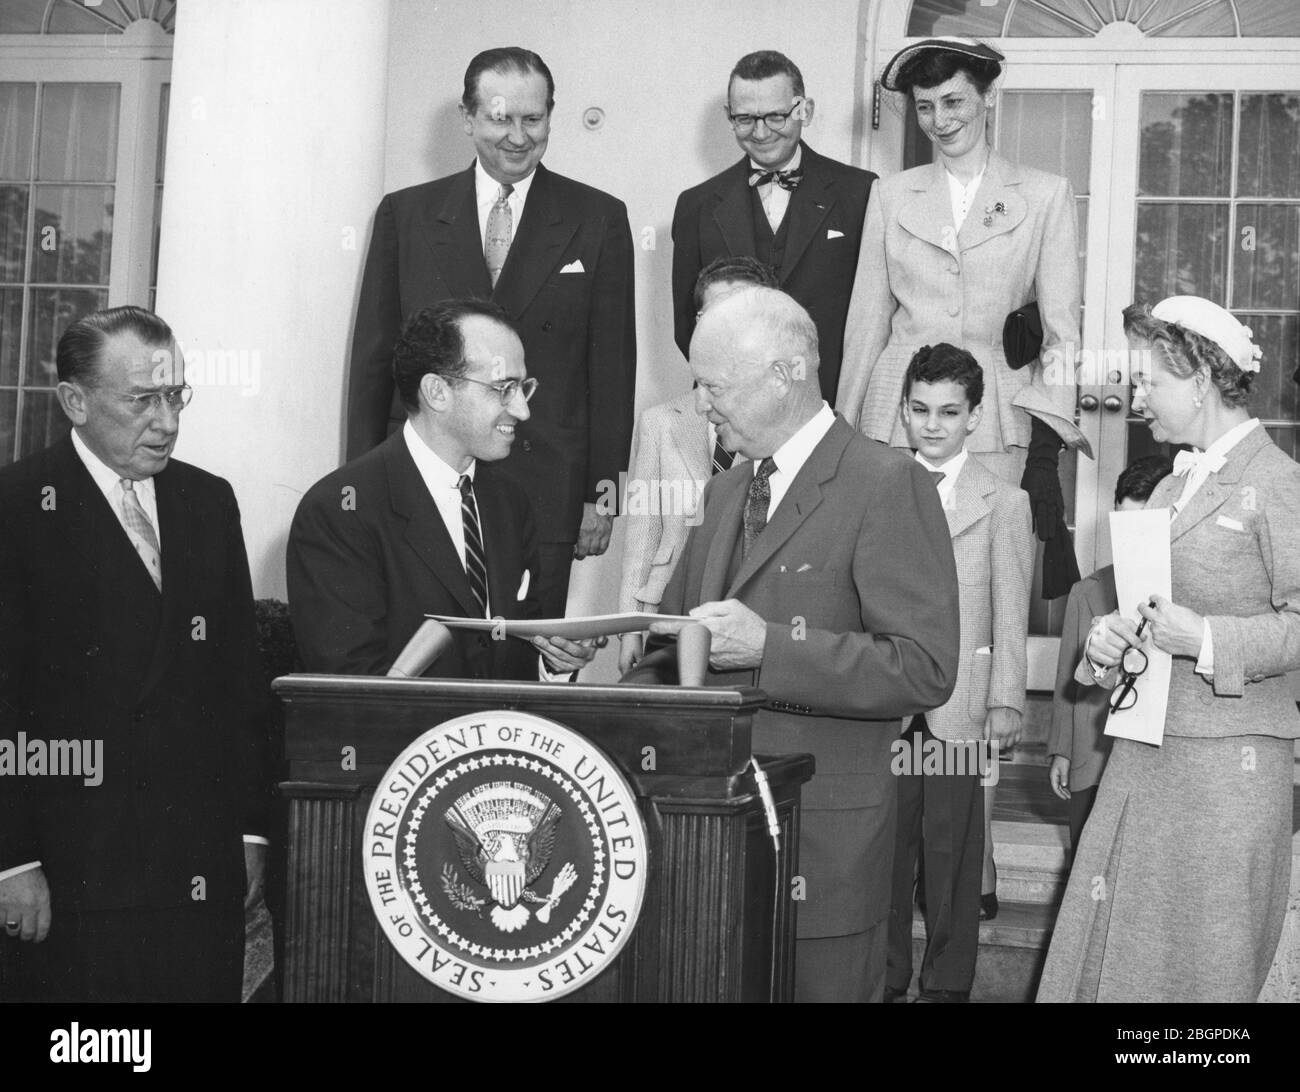 Dr. Jonas Salk (second from the left), University of Pittsburgh scientist who discovered the anti-polio vaccine, receives a special citation from President Eisenhower at the White House. 1955. Stock Photo